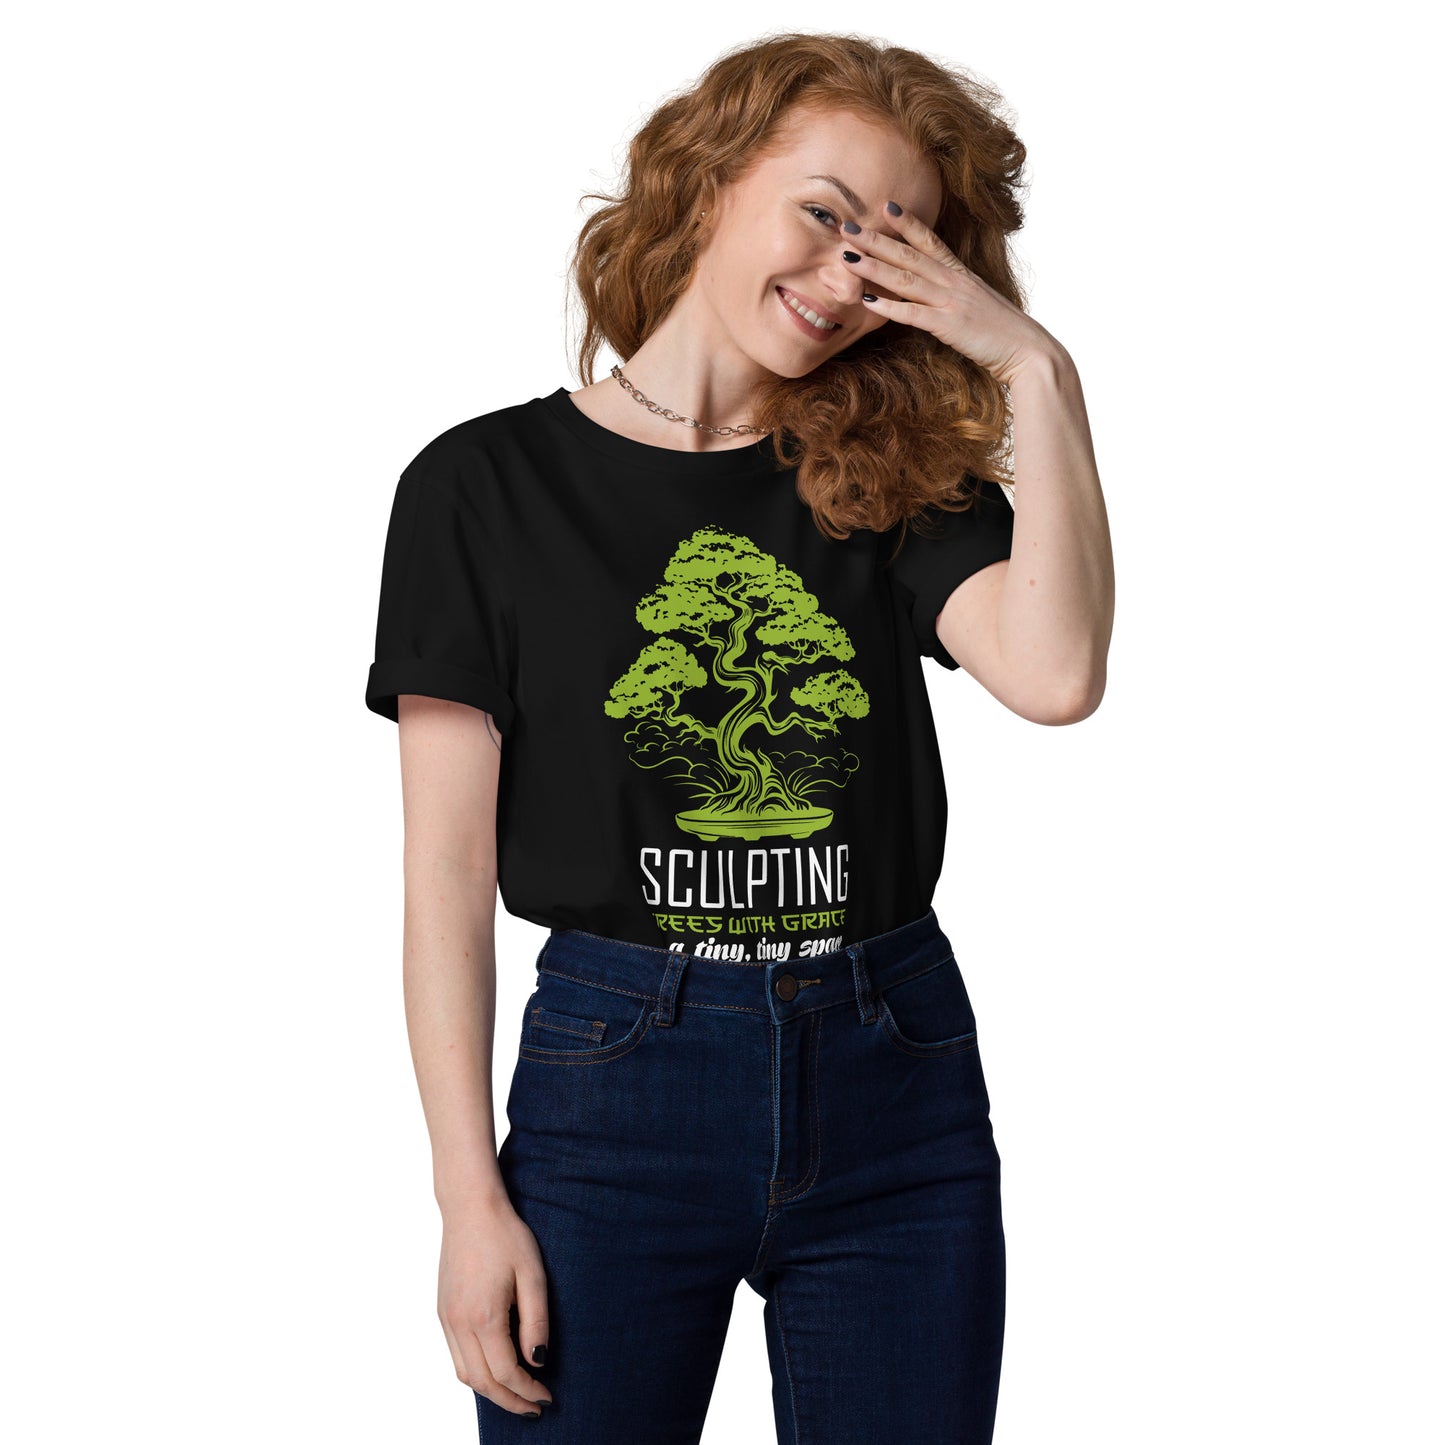 Sculpting Trees with Grace in a Tiny, Tiny Space Bio-Baumwoll-T-Shirt